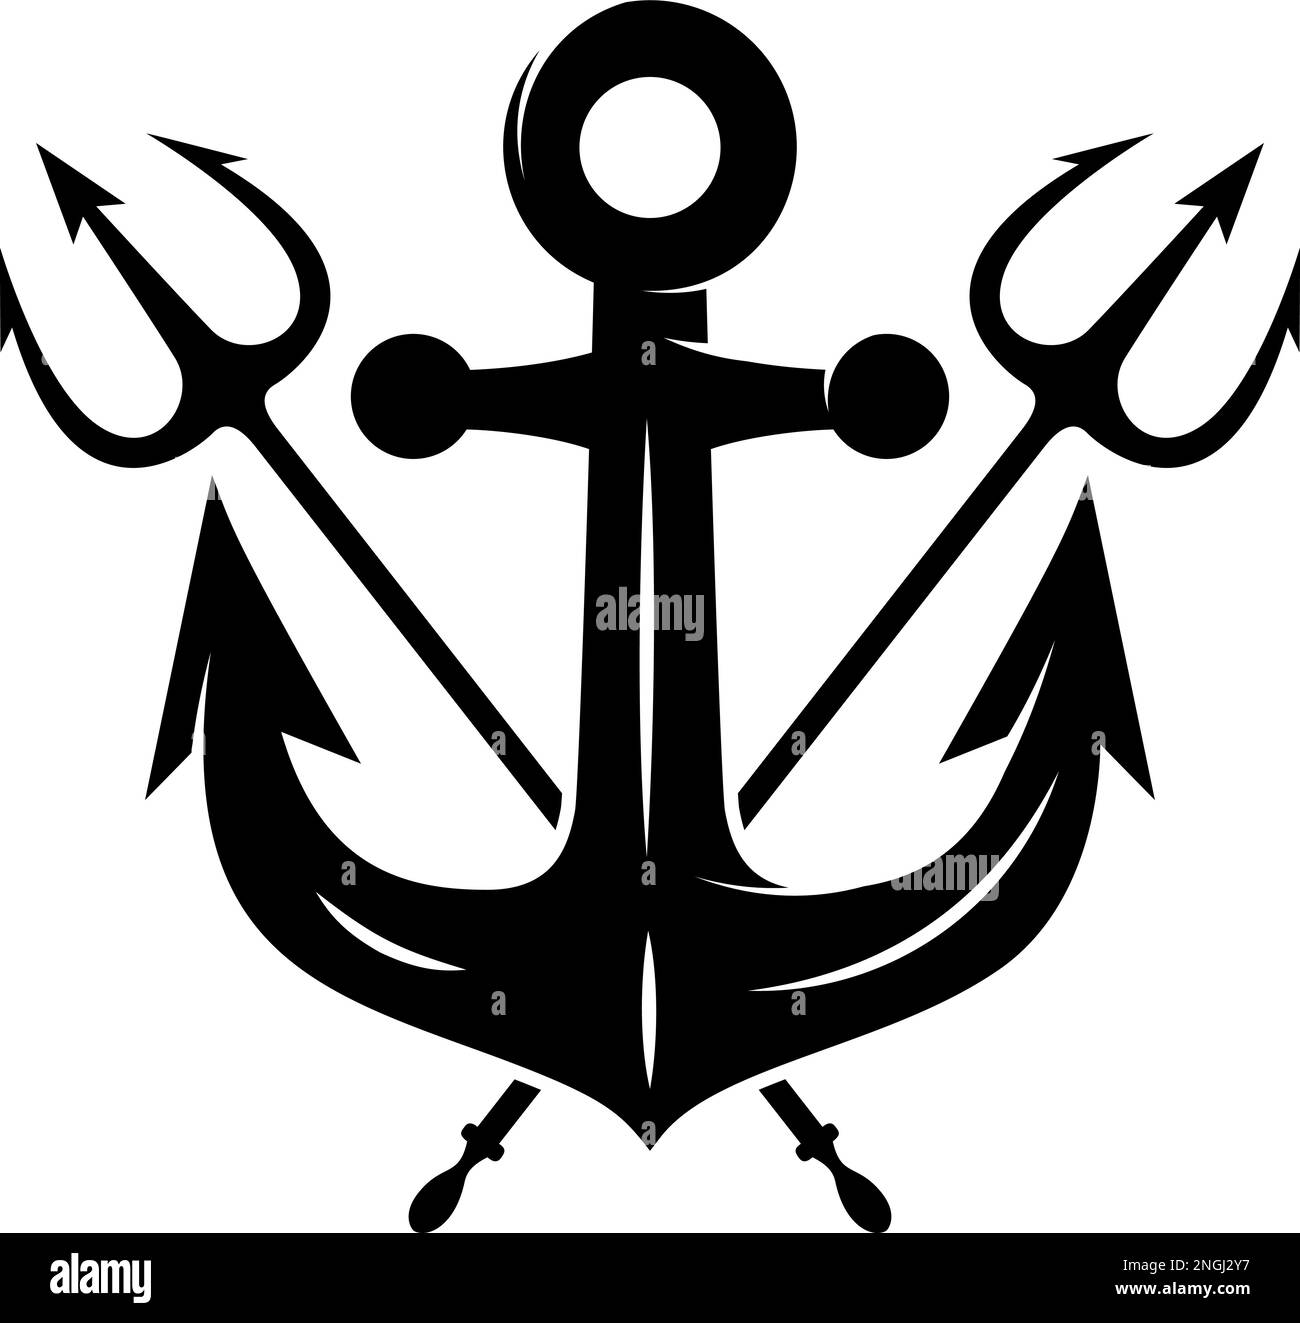 Illustration of sea anchor with crossed tridents. Design element for logo, sign, emblem. Vector illustration Stock Vector